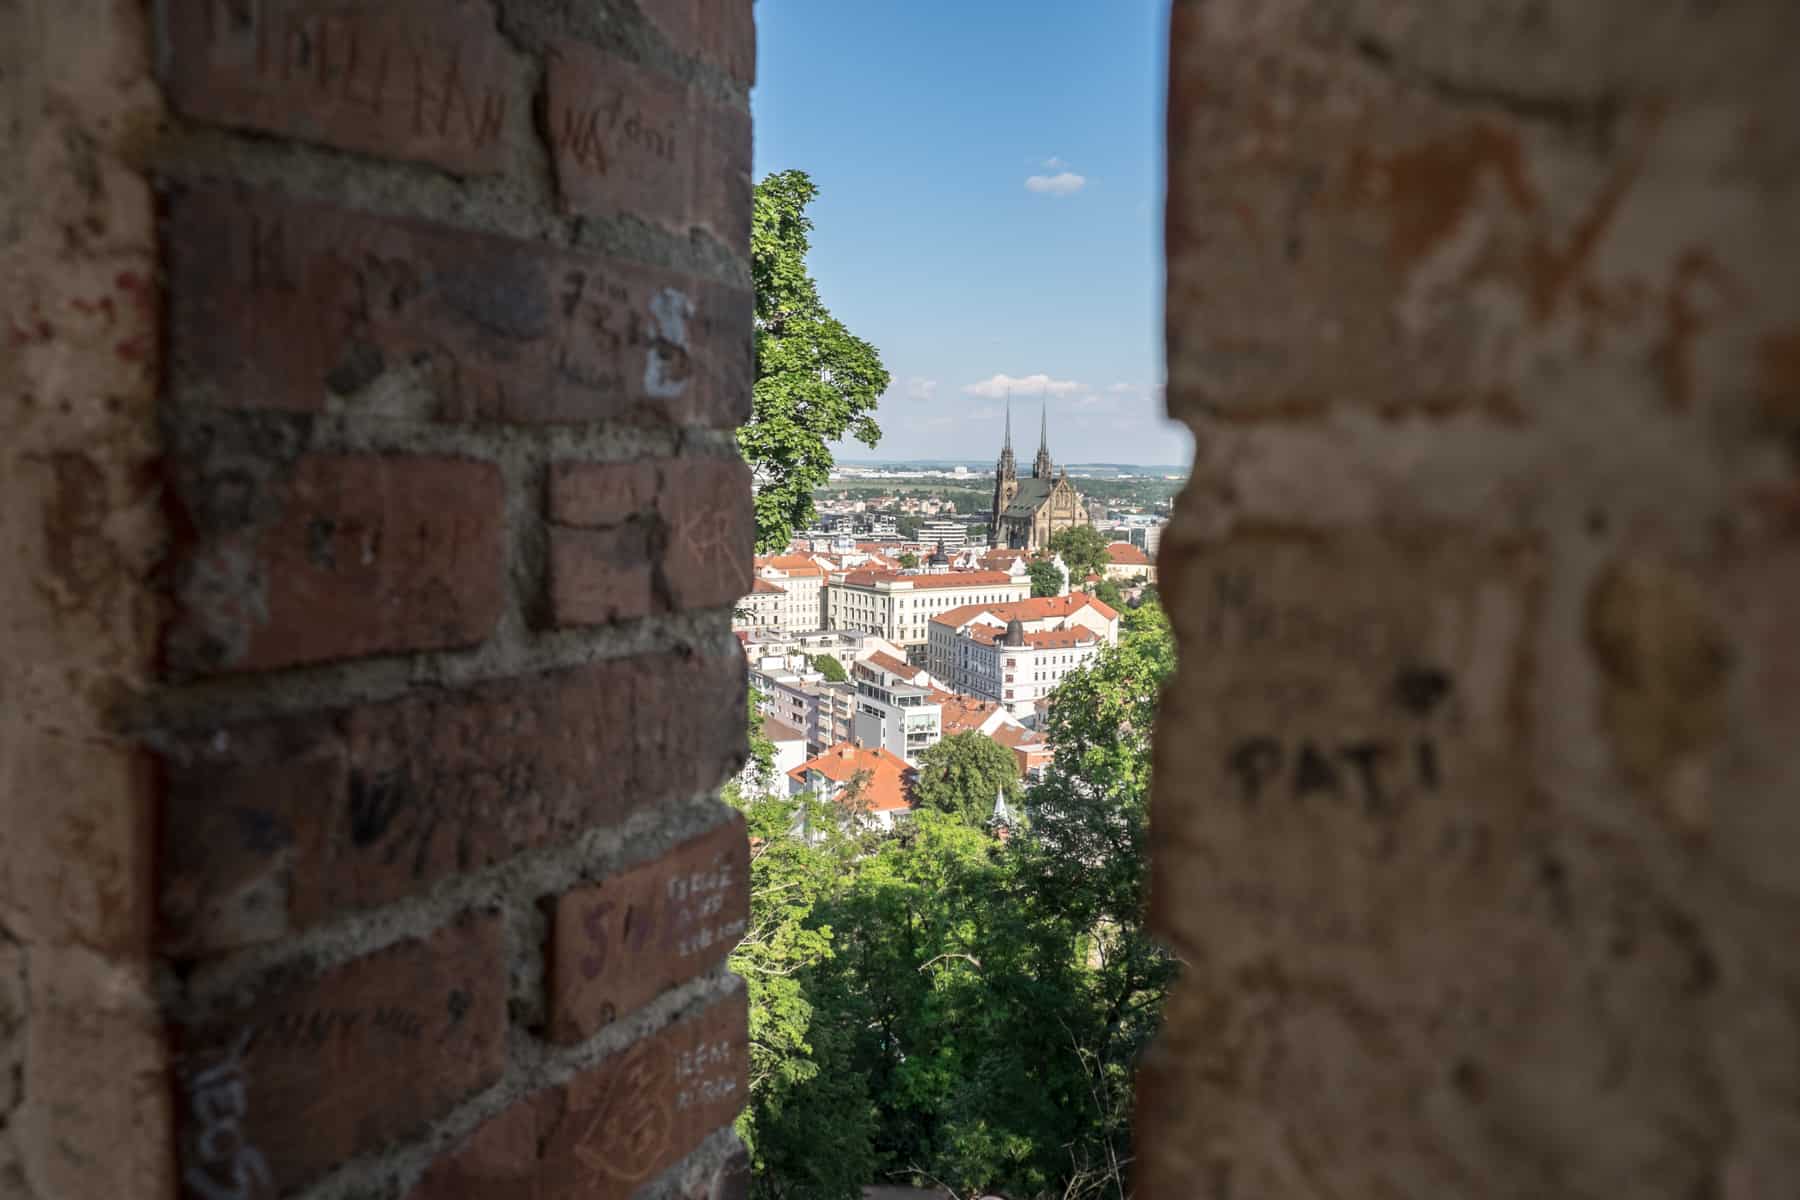 A view to Brno's caramel-black Cathedral, and the surrounding red roofed city buildings, from between the brick walls of a castle tower at a higher level.